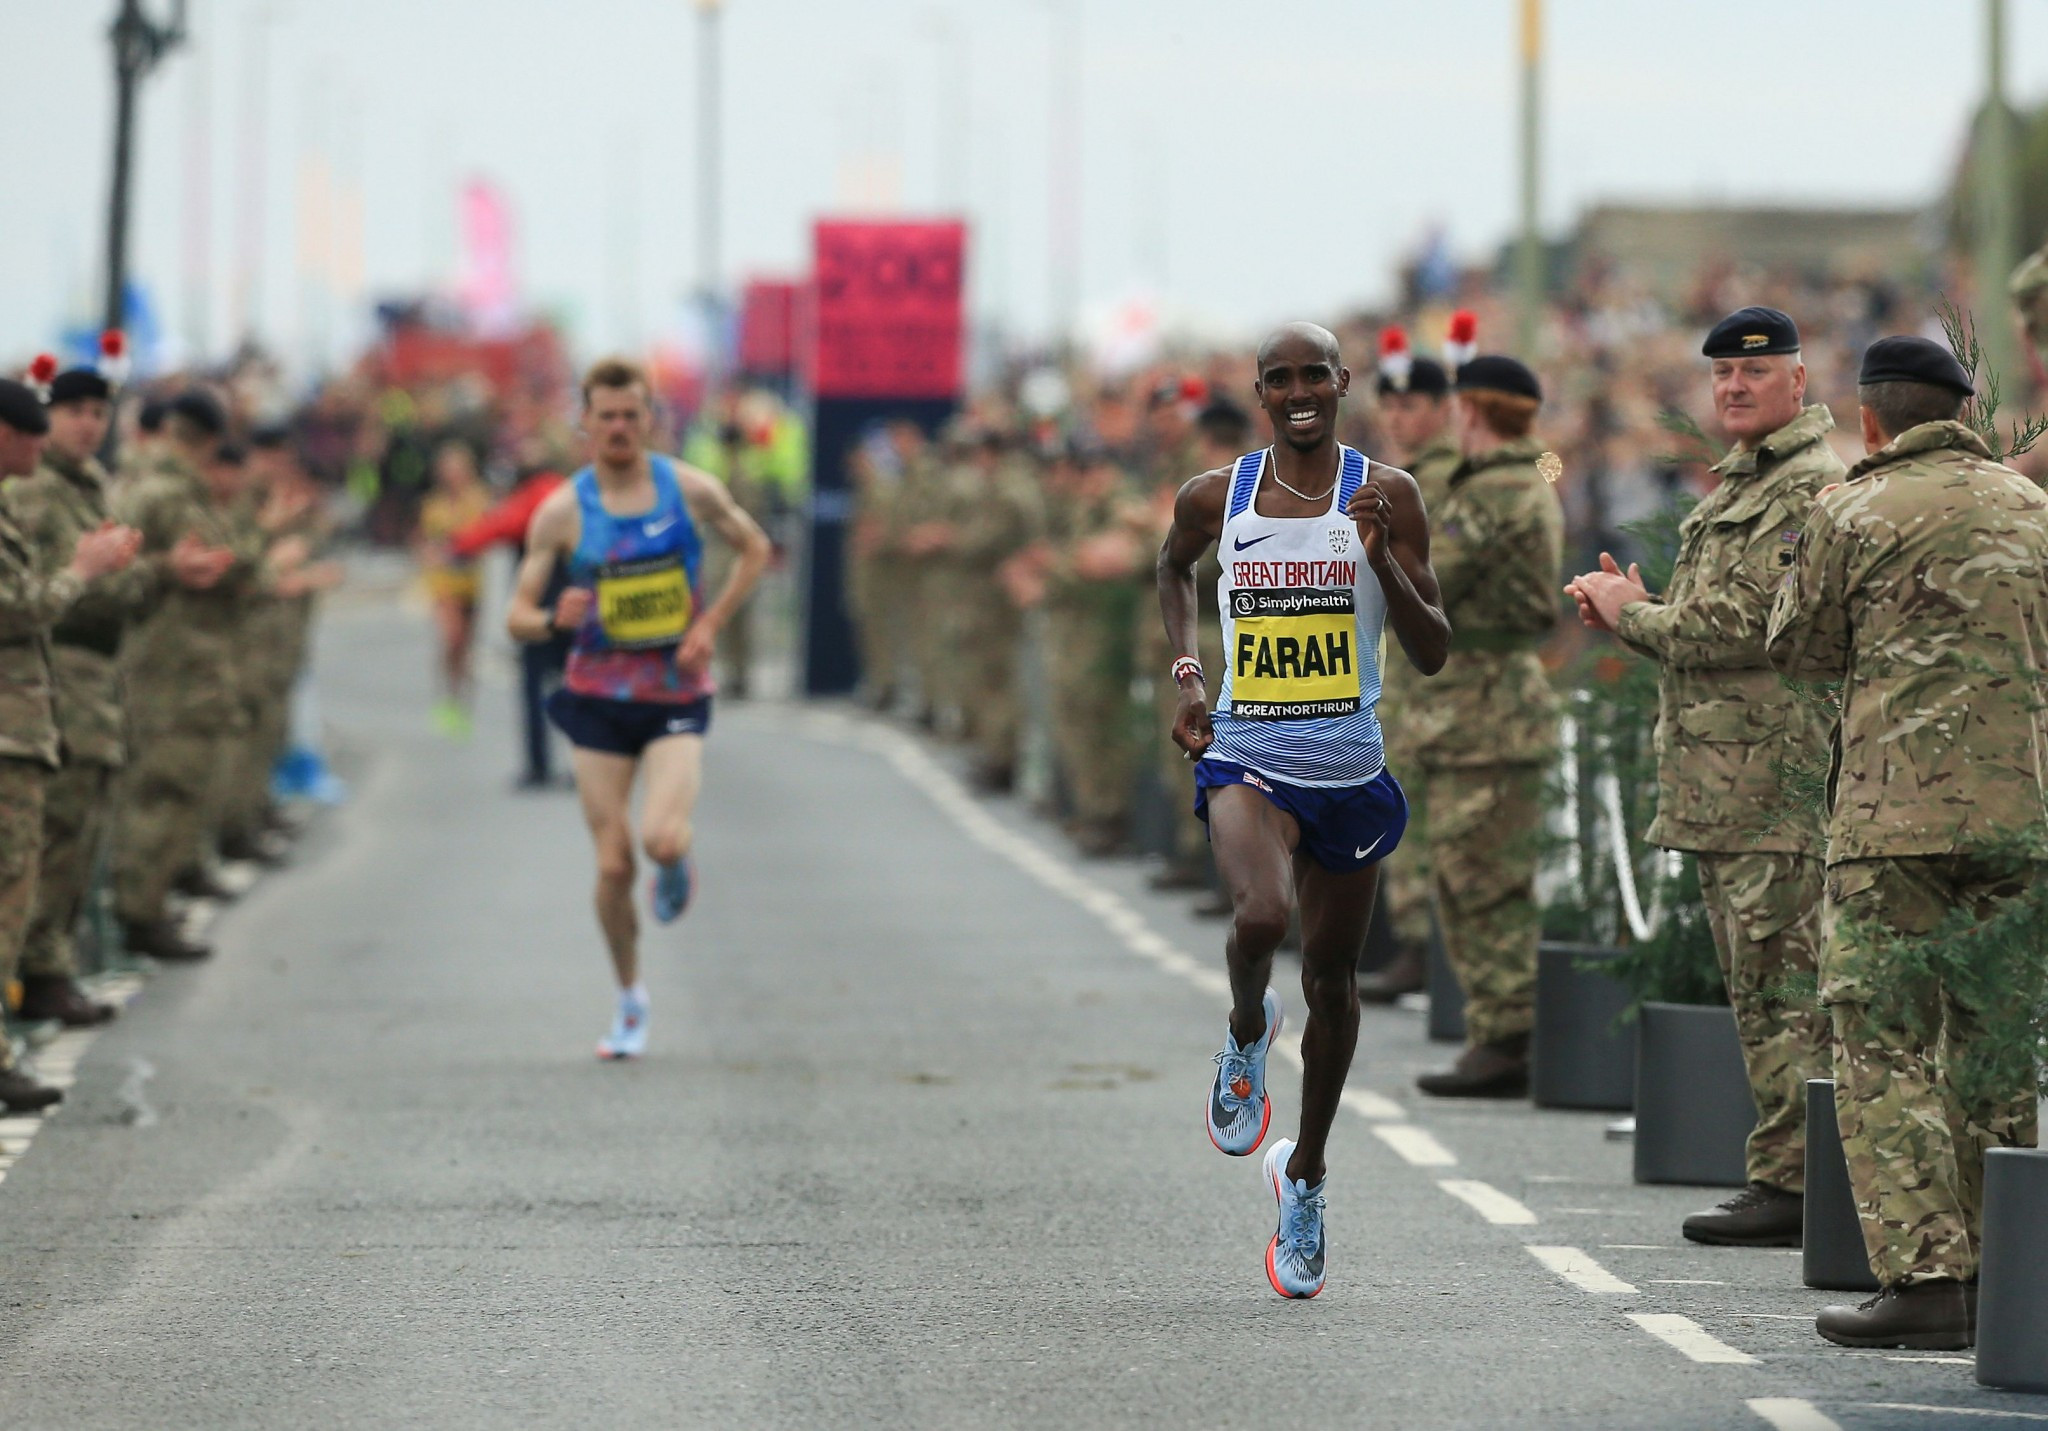 Sir Mo Farah ousprints Jake Robertson to win a fourth consecutive Great North Run title ©Getty Images